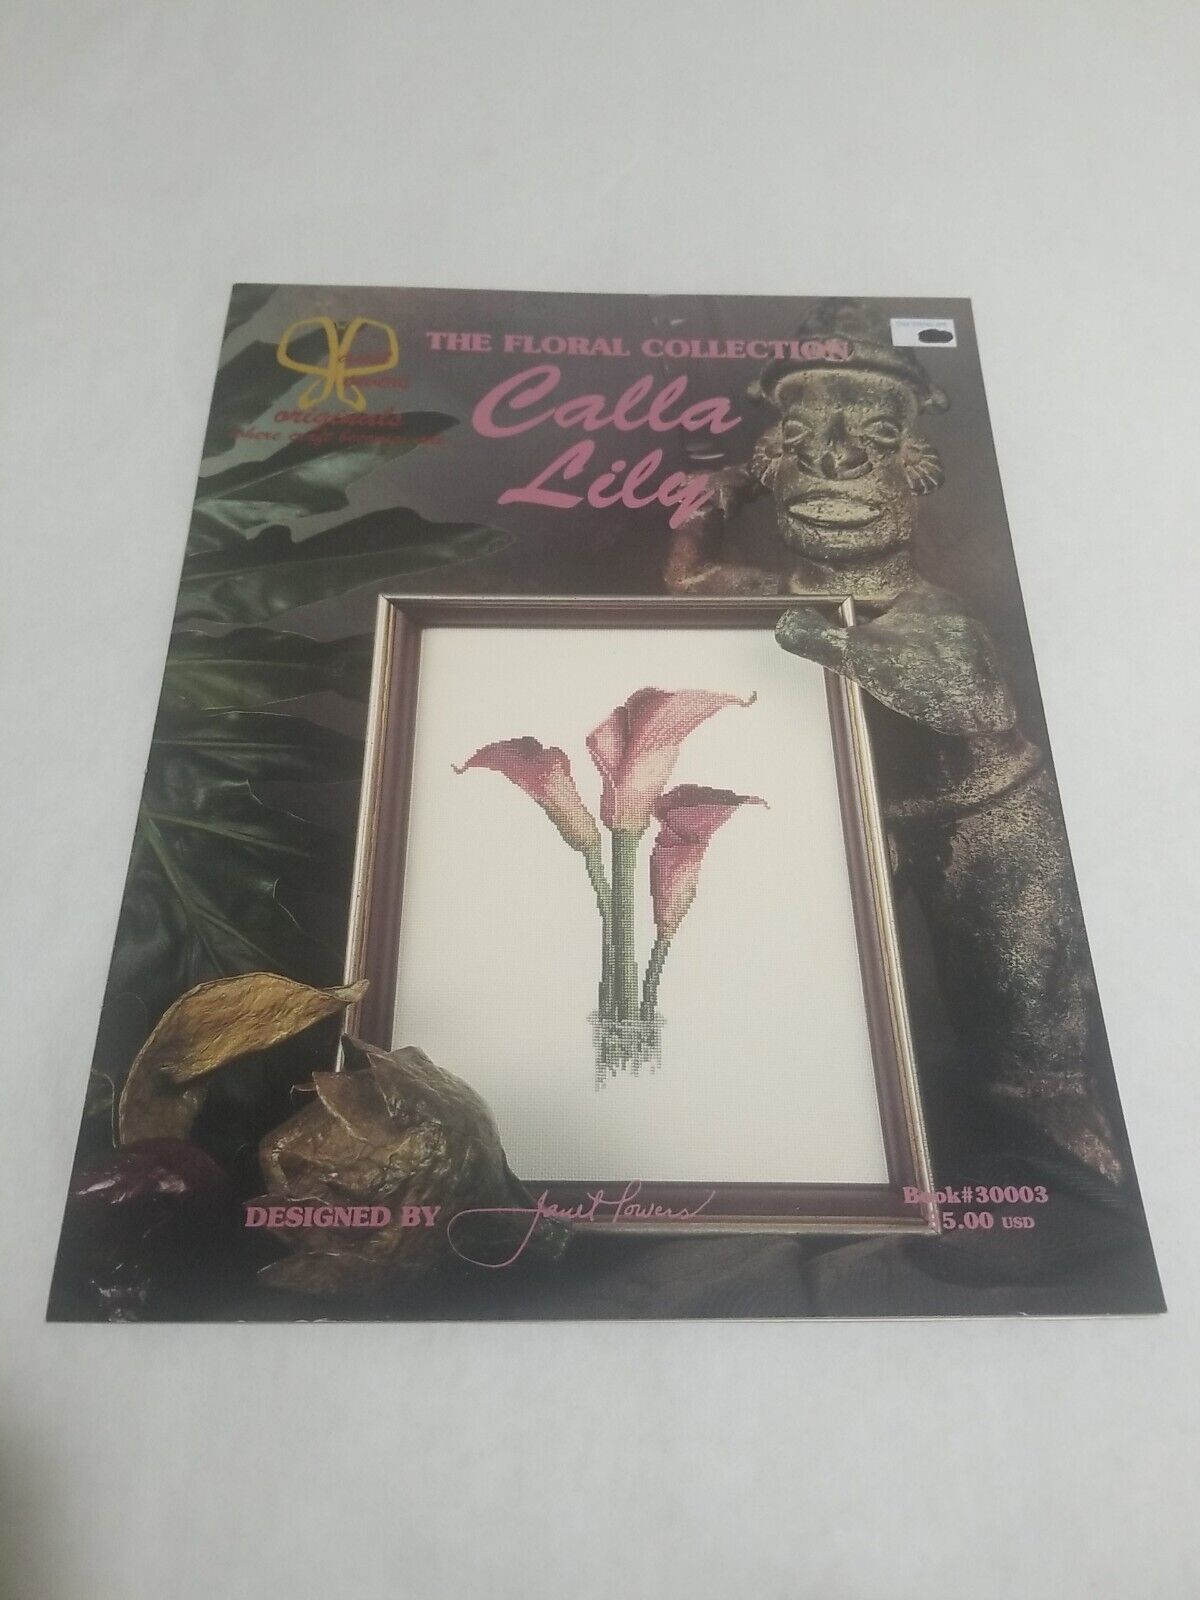 The Floral Collection: Calla Lily Book #30003 by Janet Powers 1997 - $10.98